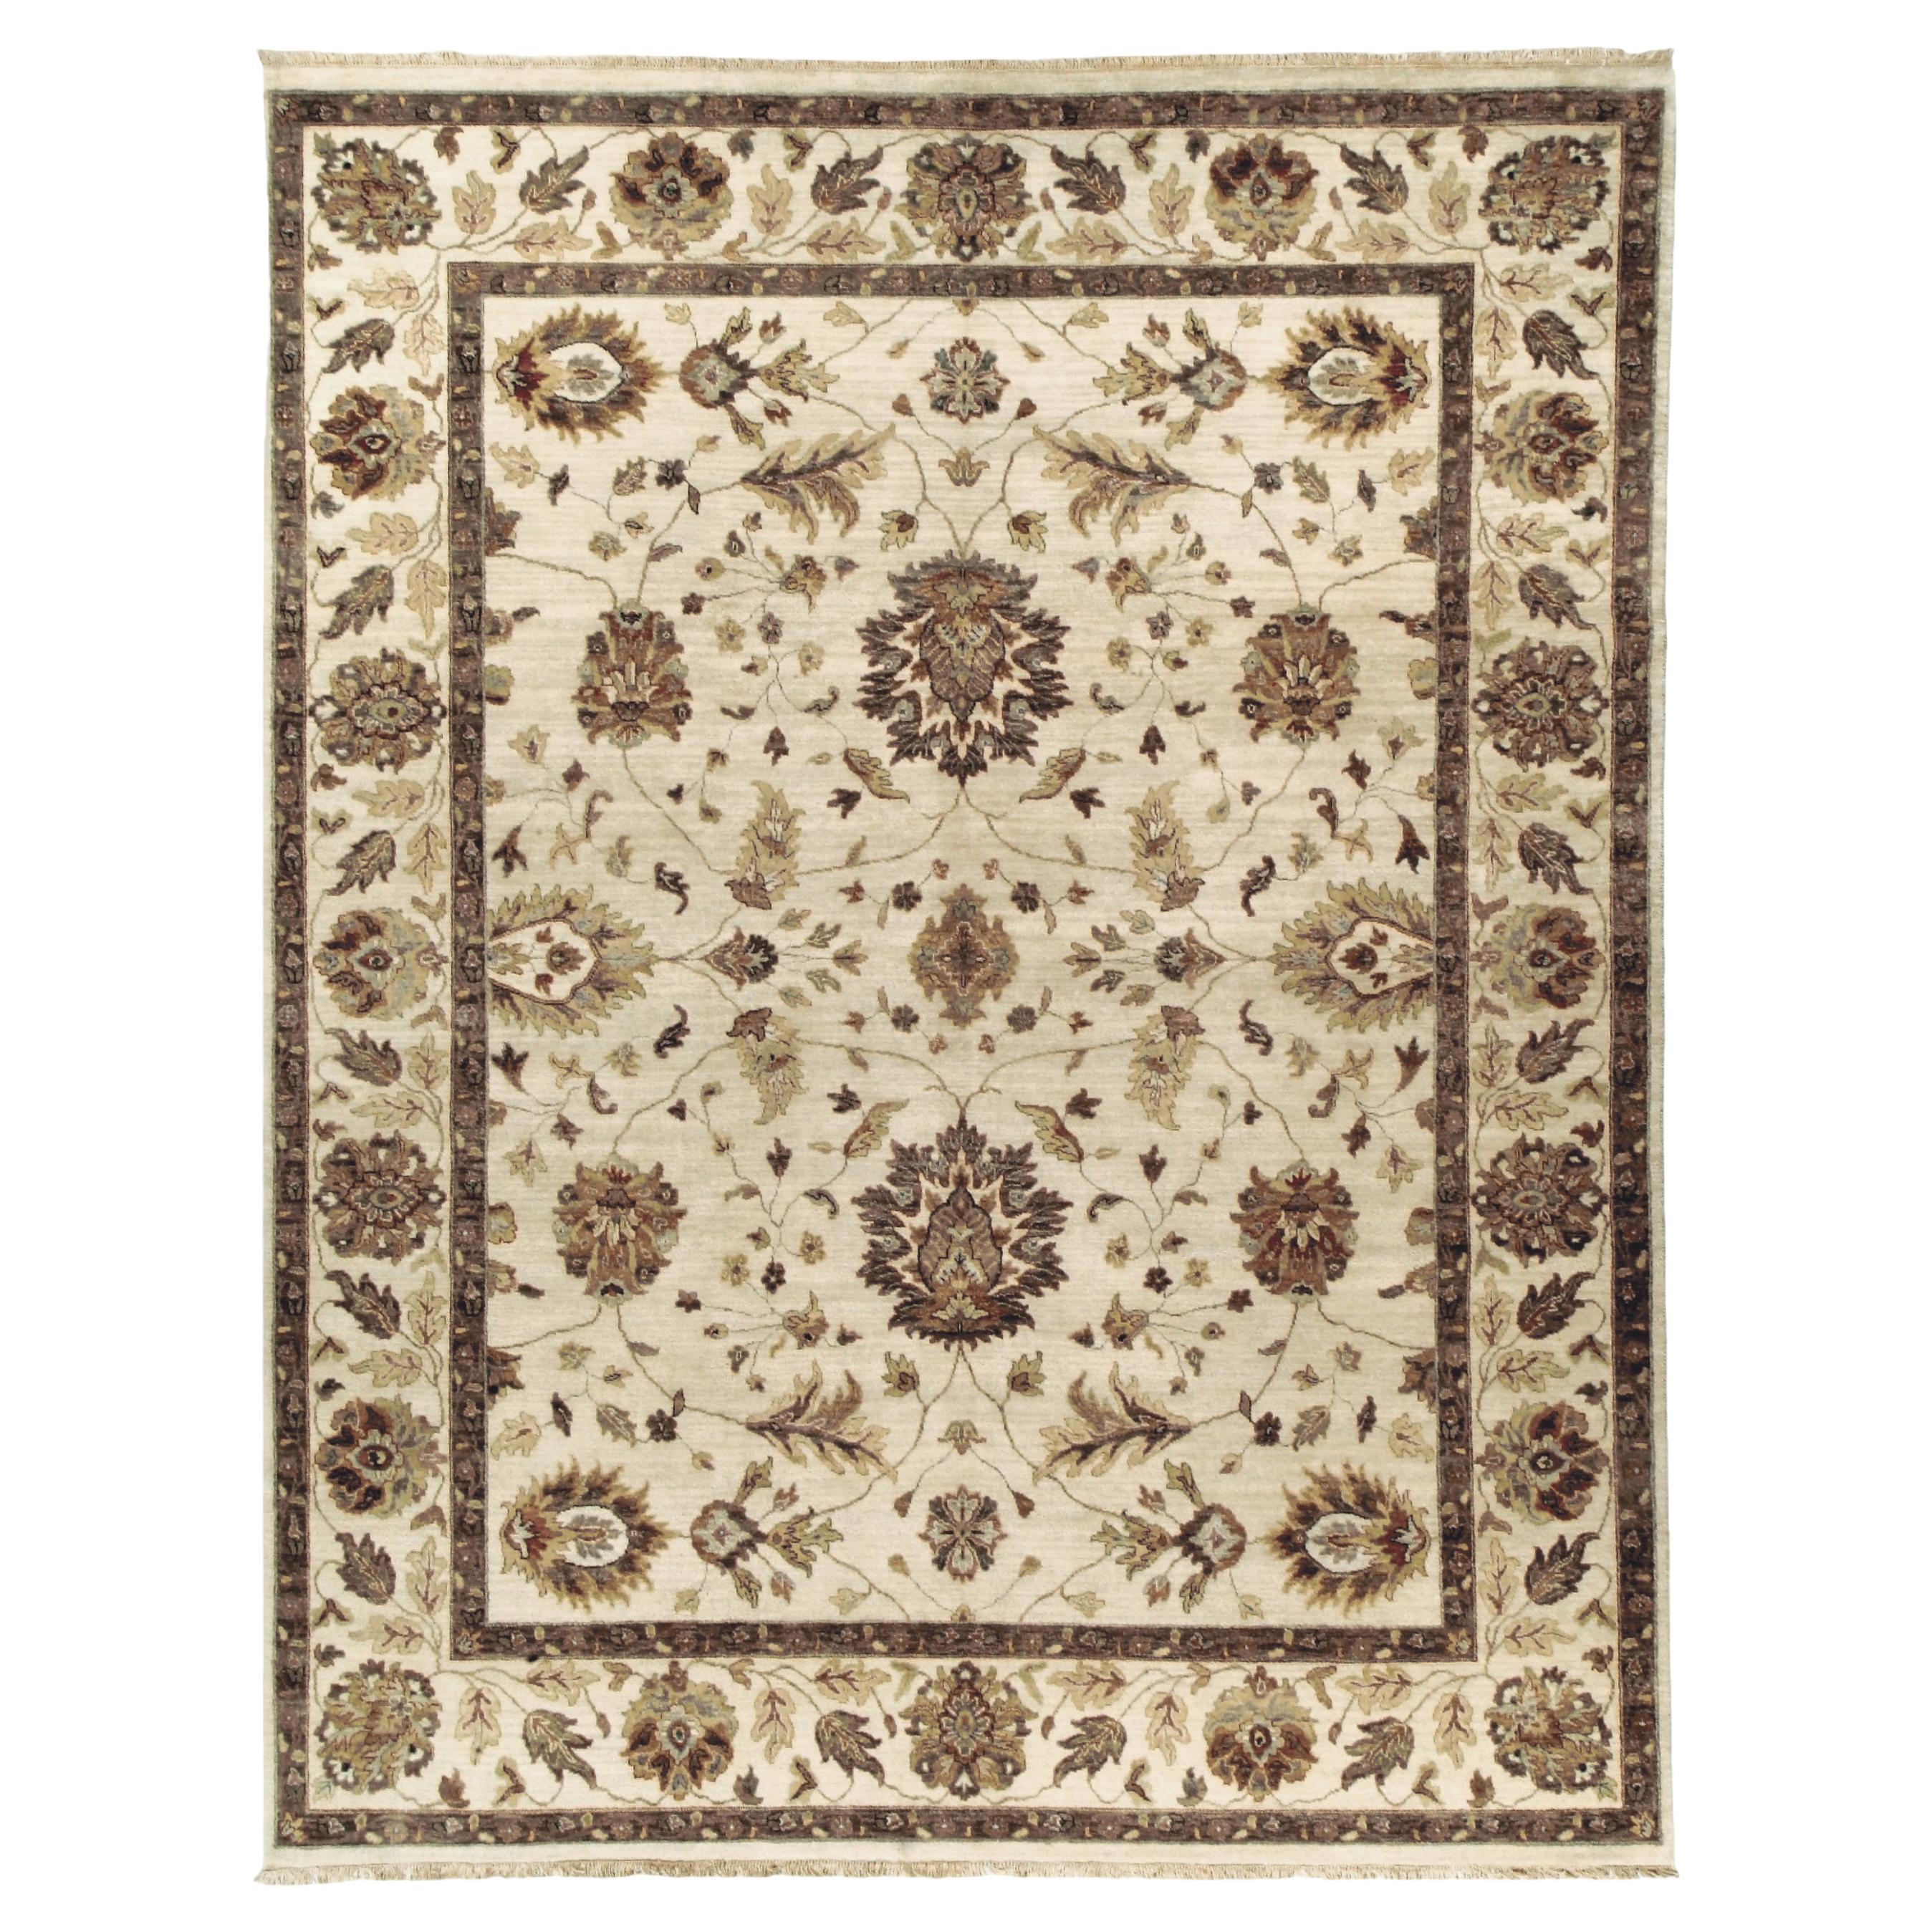 Luxury Traditional Hand-Knotted Ivory 14x26 Rug